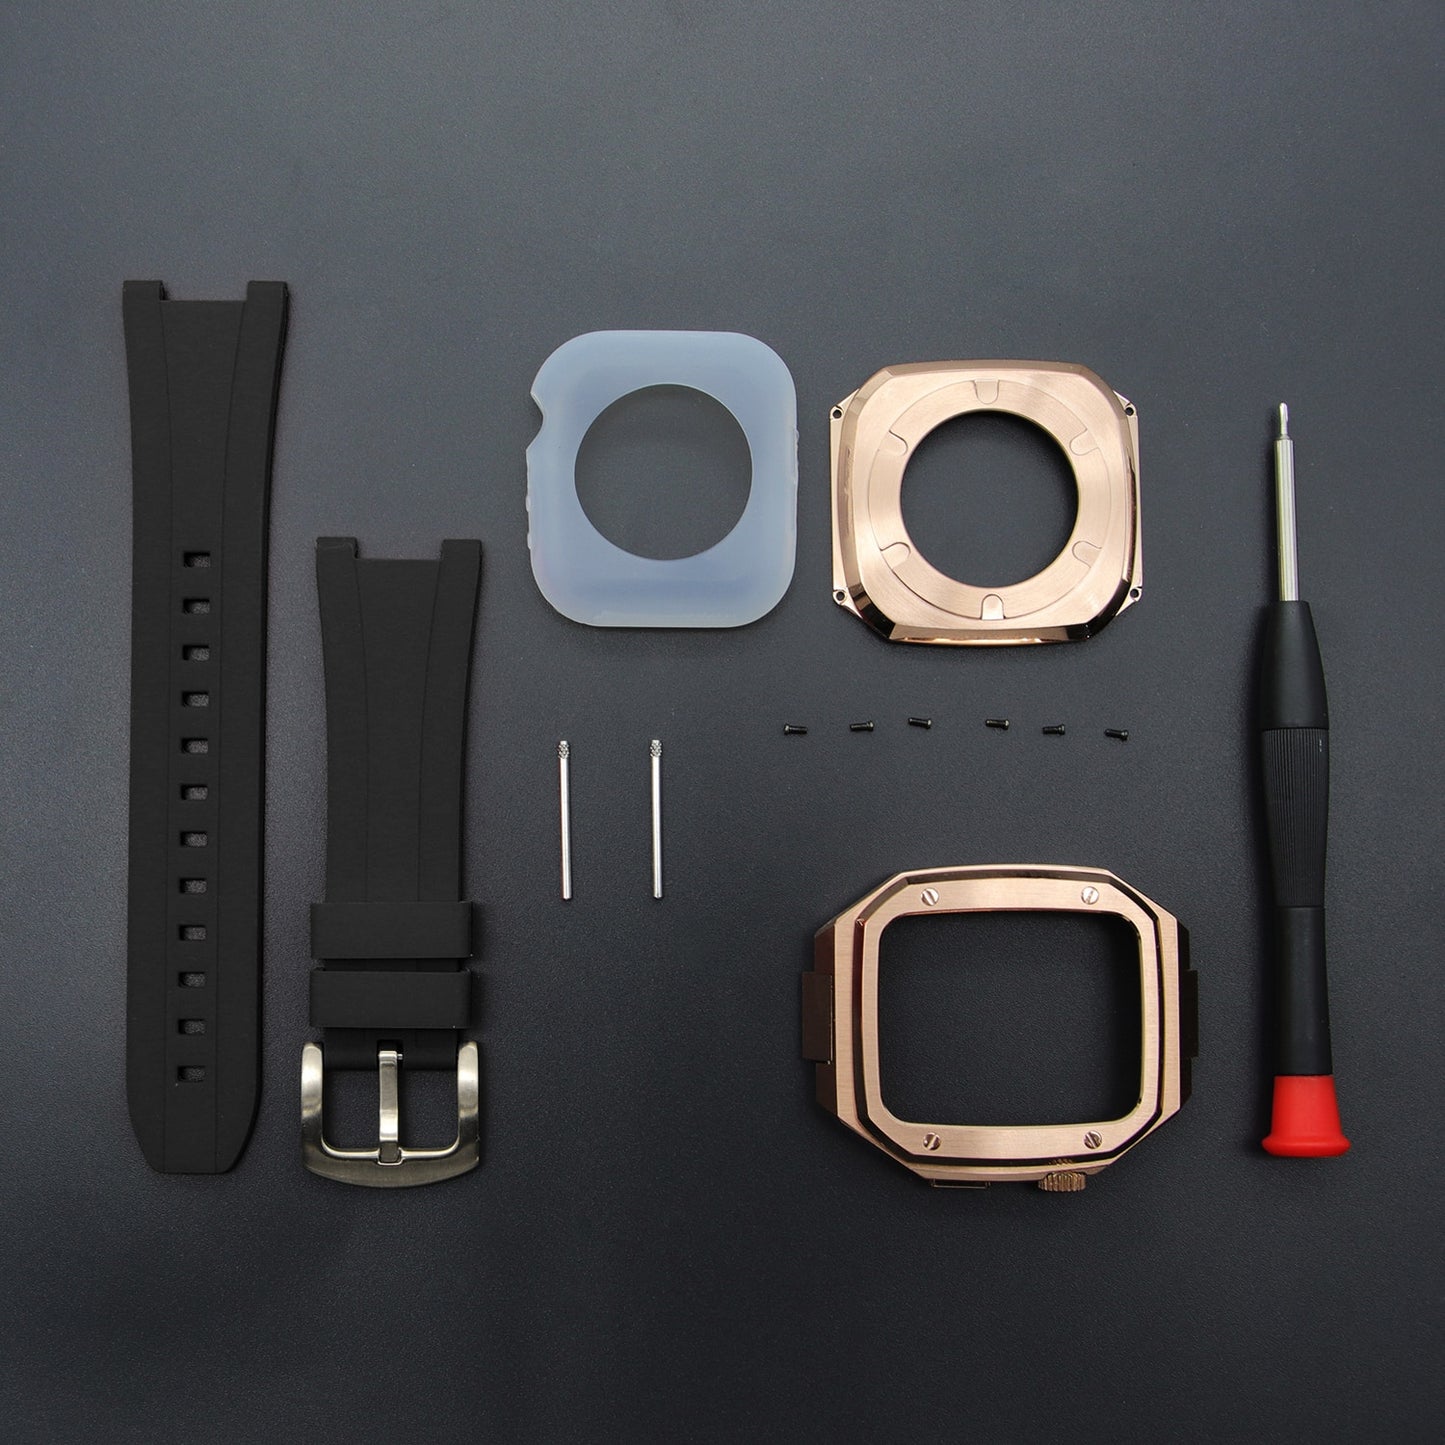 Luxury Modification Kit for Apple Watch